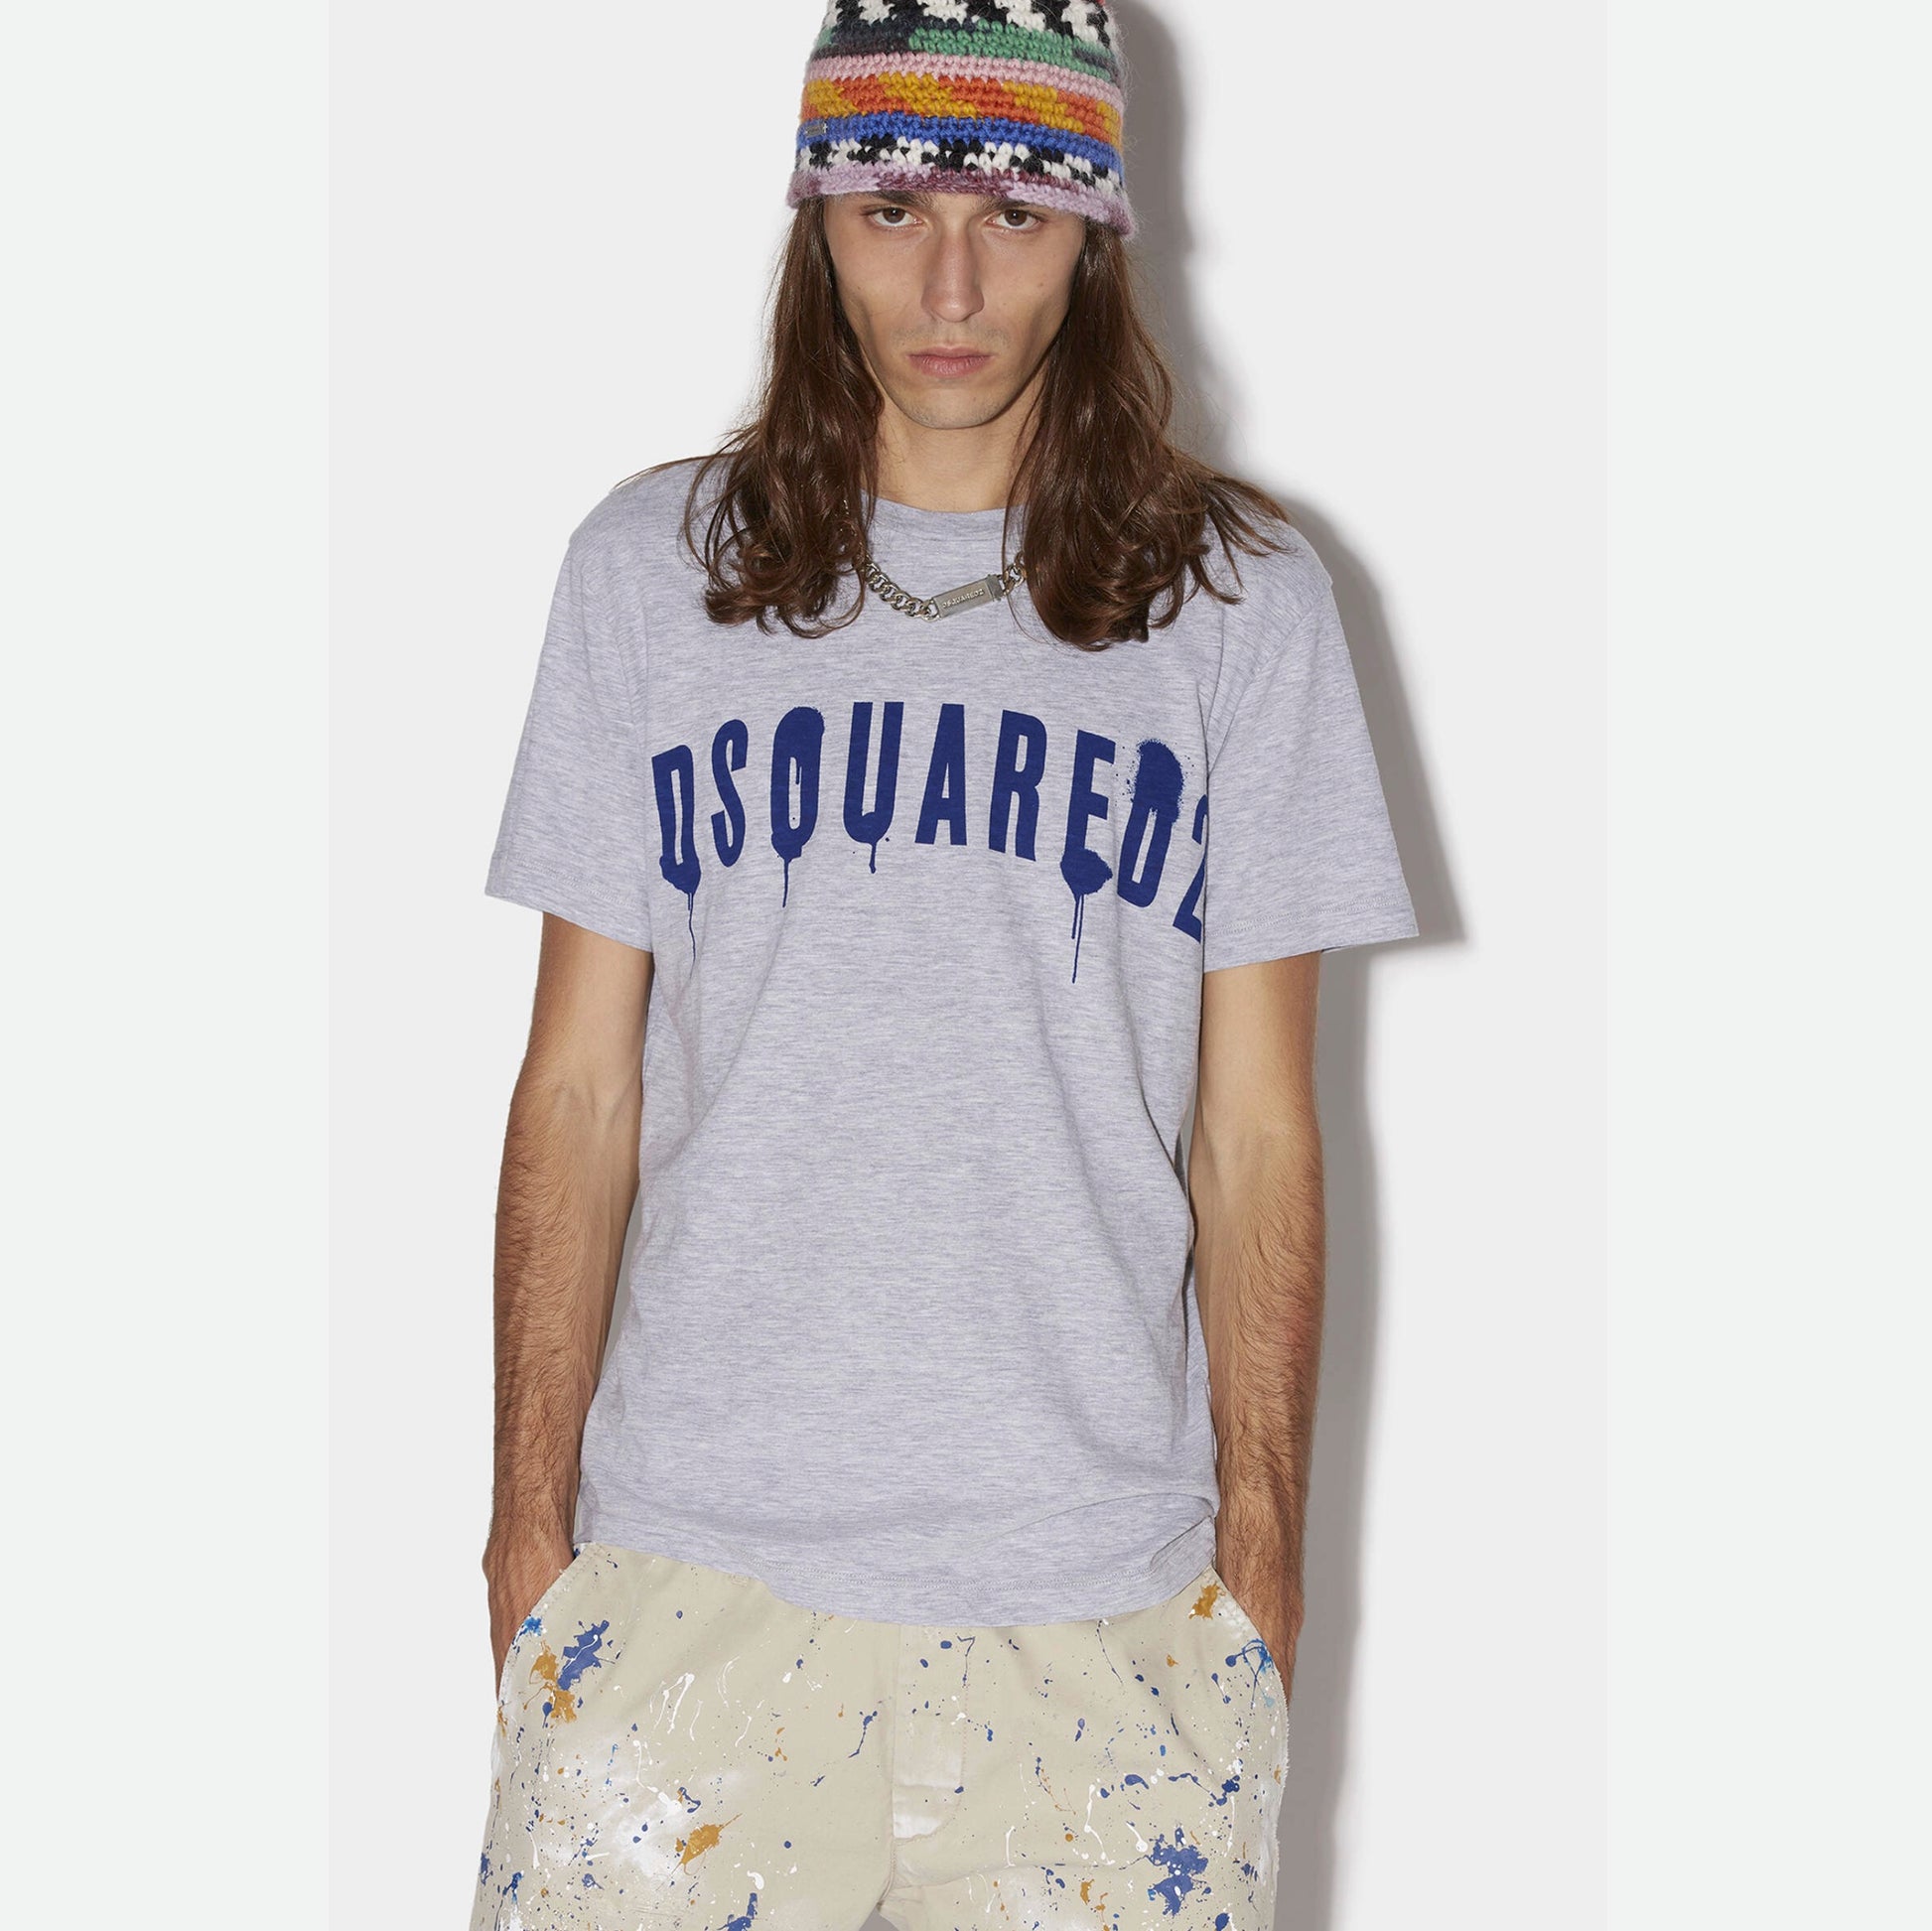 The classic marl tee is reworked in DSQUARED2 style for this summer. Features a striking paint drip logo on a plain-dye base. 